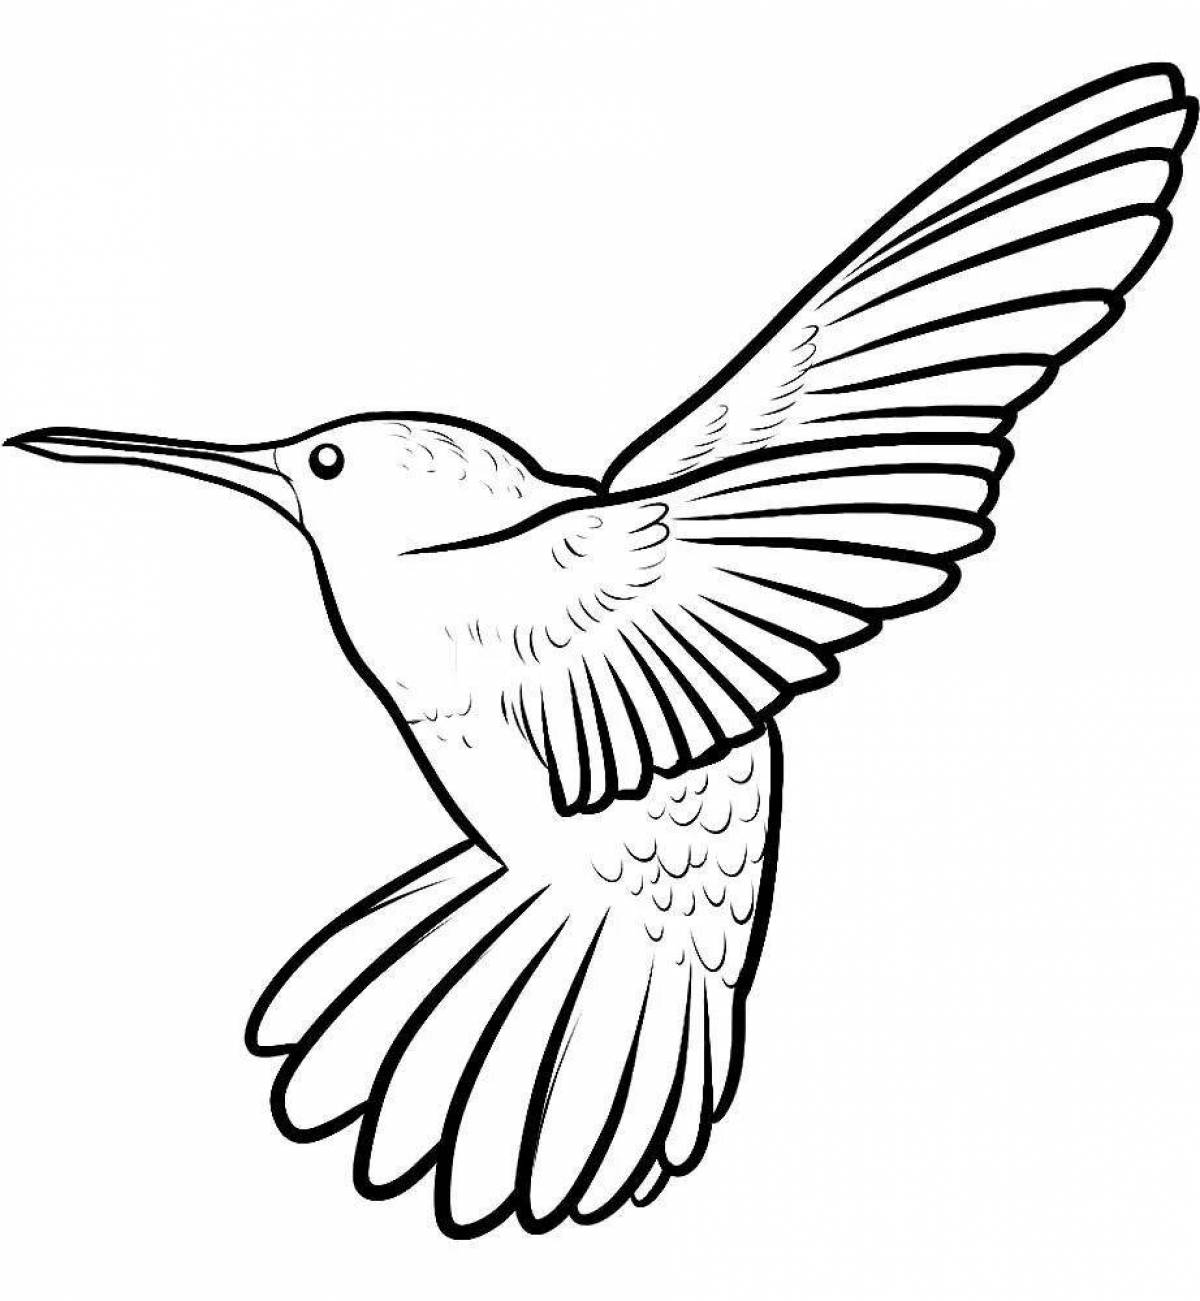 A shining hummingbird coloring book for kids